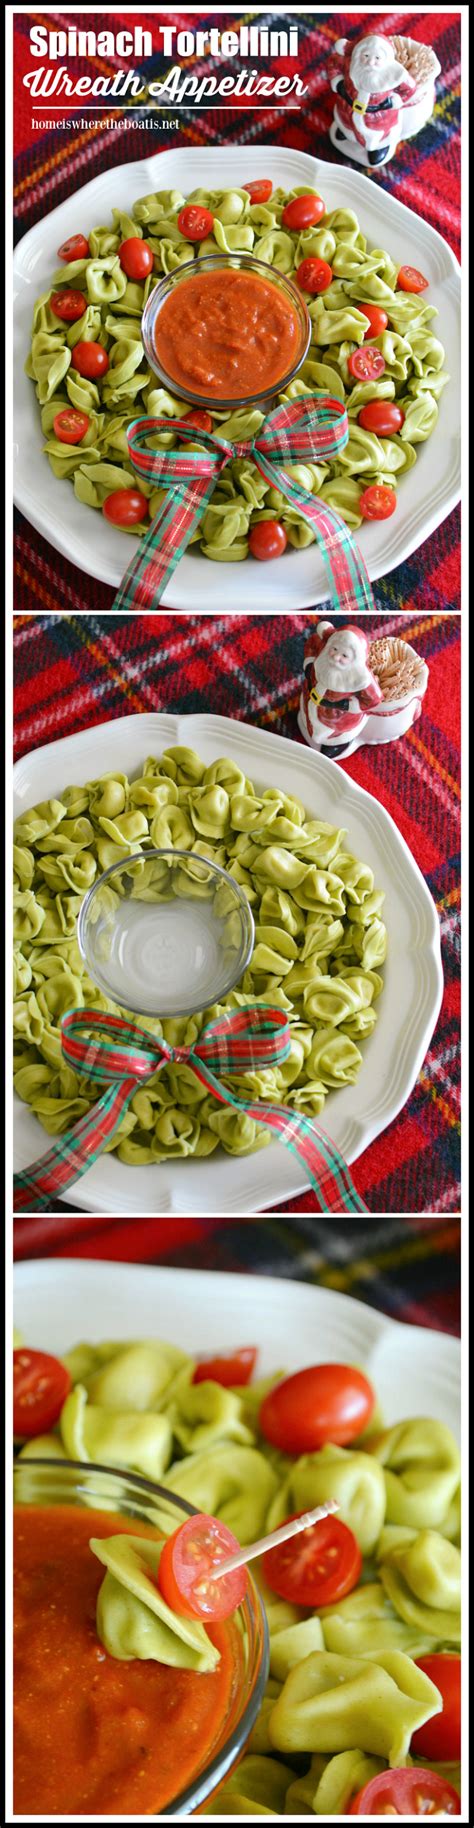 Astonishing simple christmas party appetizers for how to make a dimension : Easy Holiday Appetizer: Christmas Tree Cheese Board | Spinach tortellini, Holiday appetizers ...